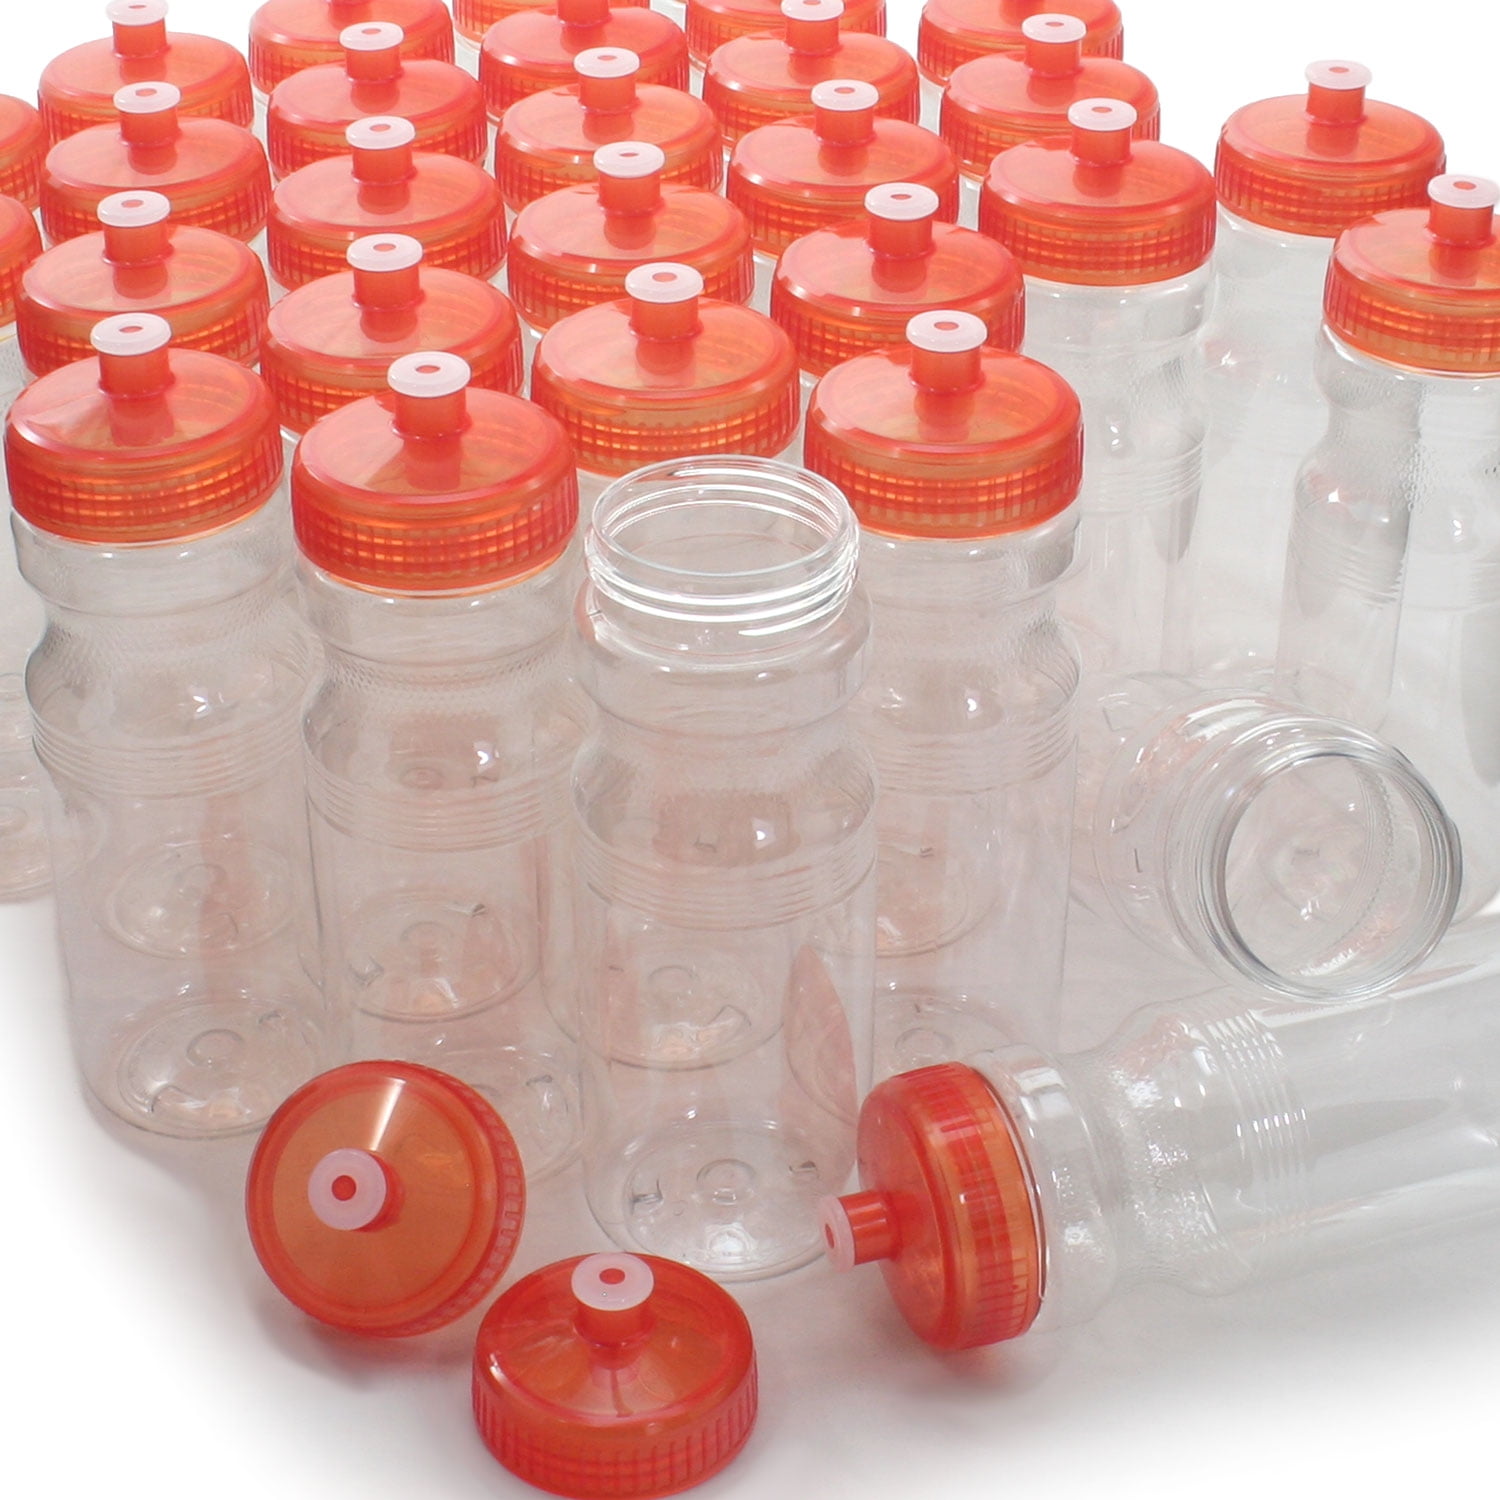 Wholesale High-Quality Sports Bottles In Bulk Factories – 1500ml